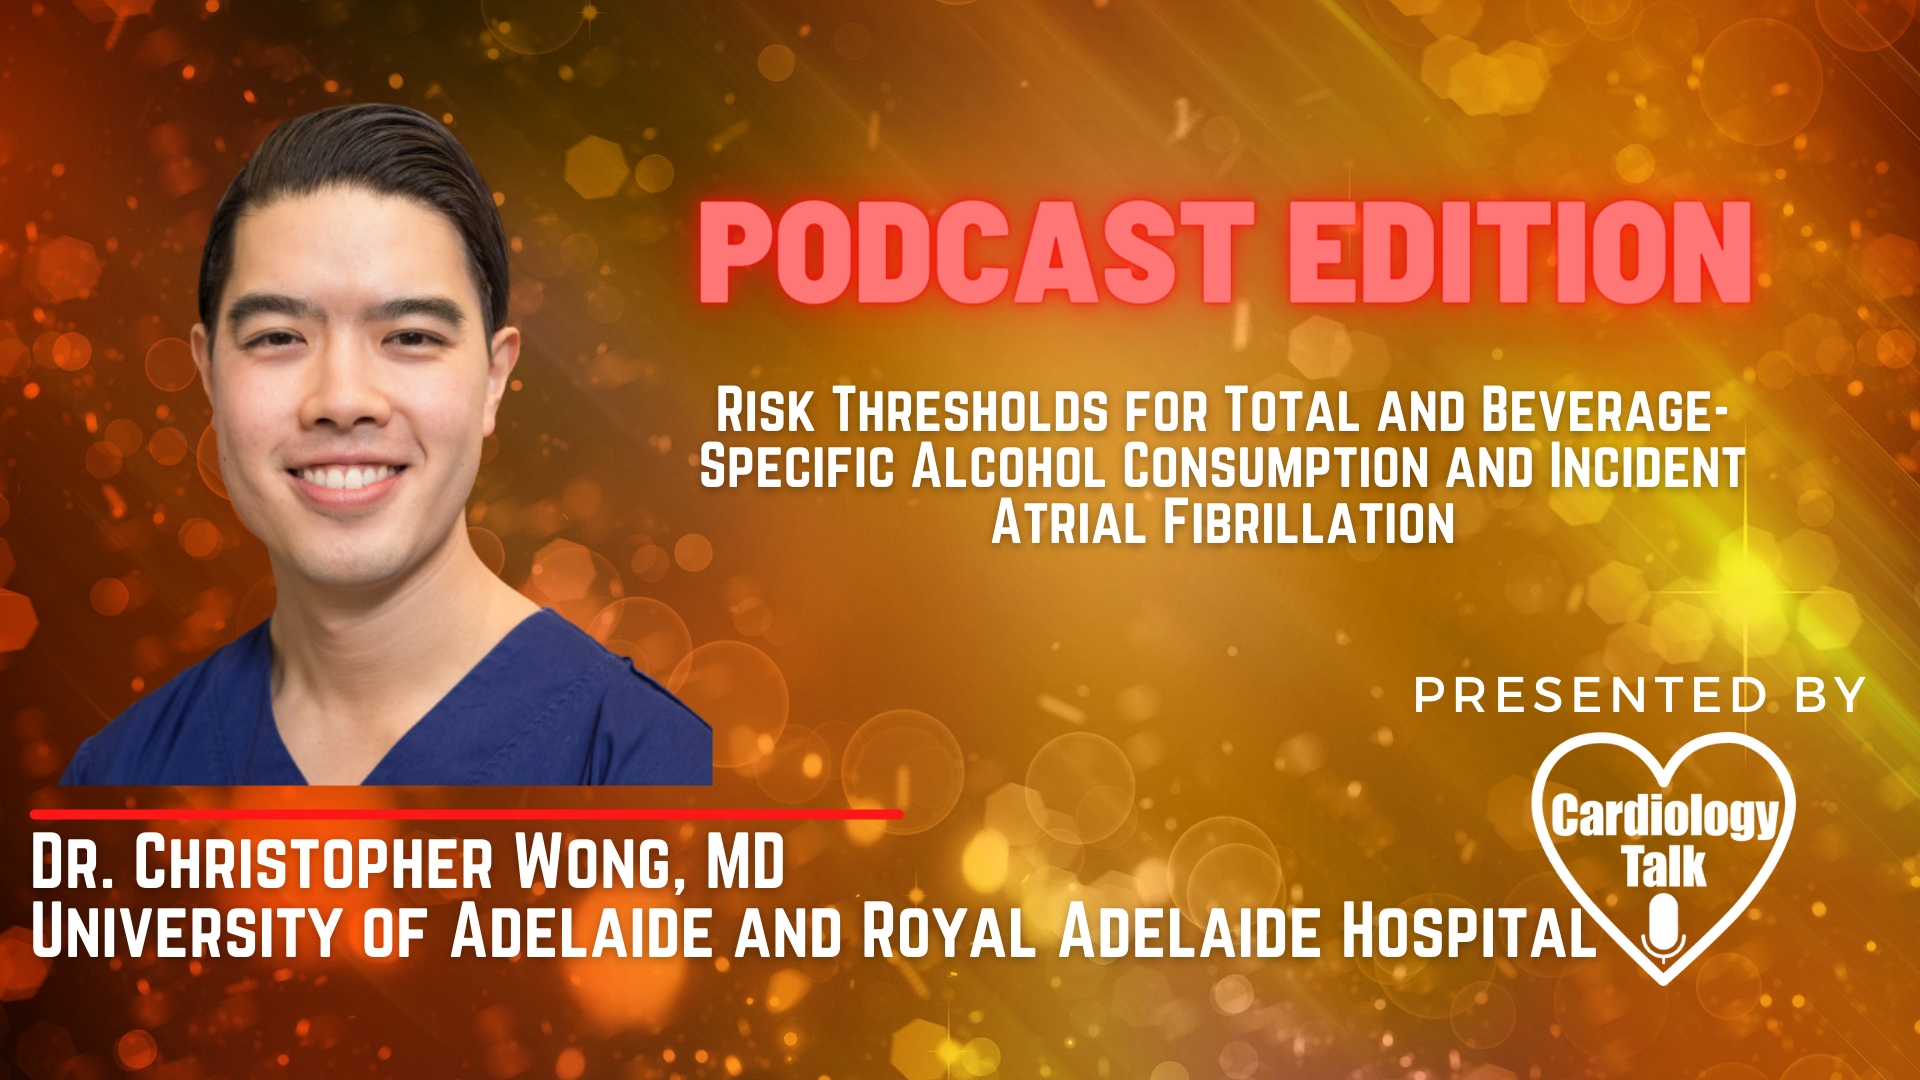 Podcast- Dr. Christopher Wong, MD- Risk Thresholds for Total and Beverage-Specific Alcohol Consumption and Incident Atrial Fibrillation